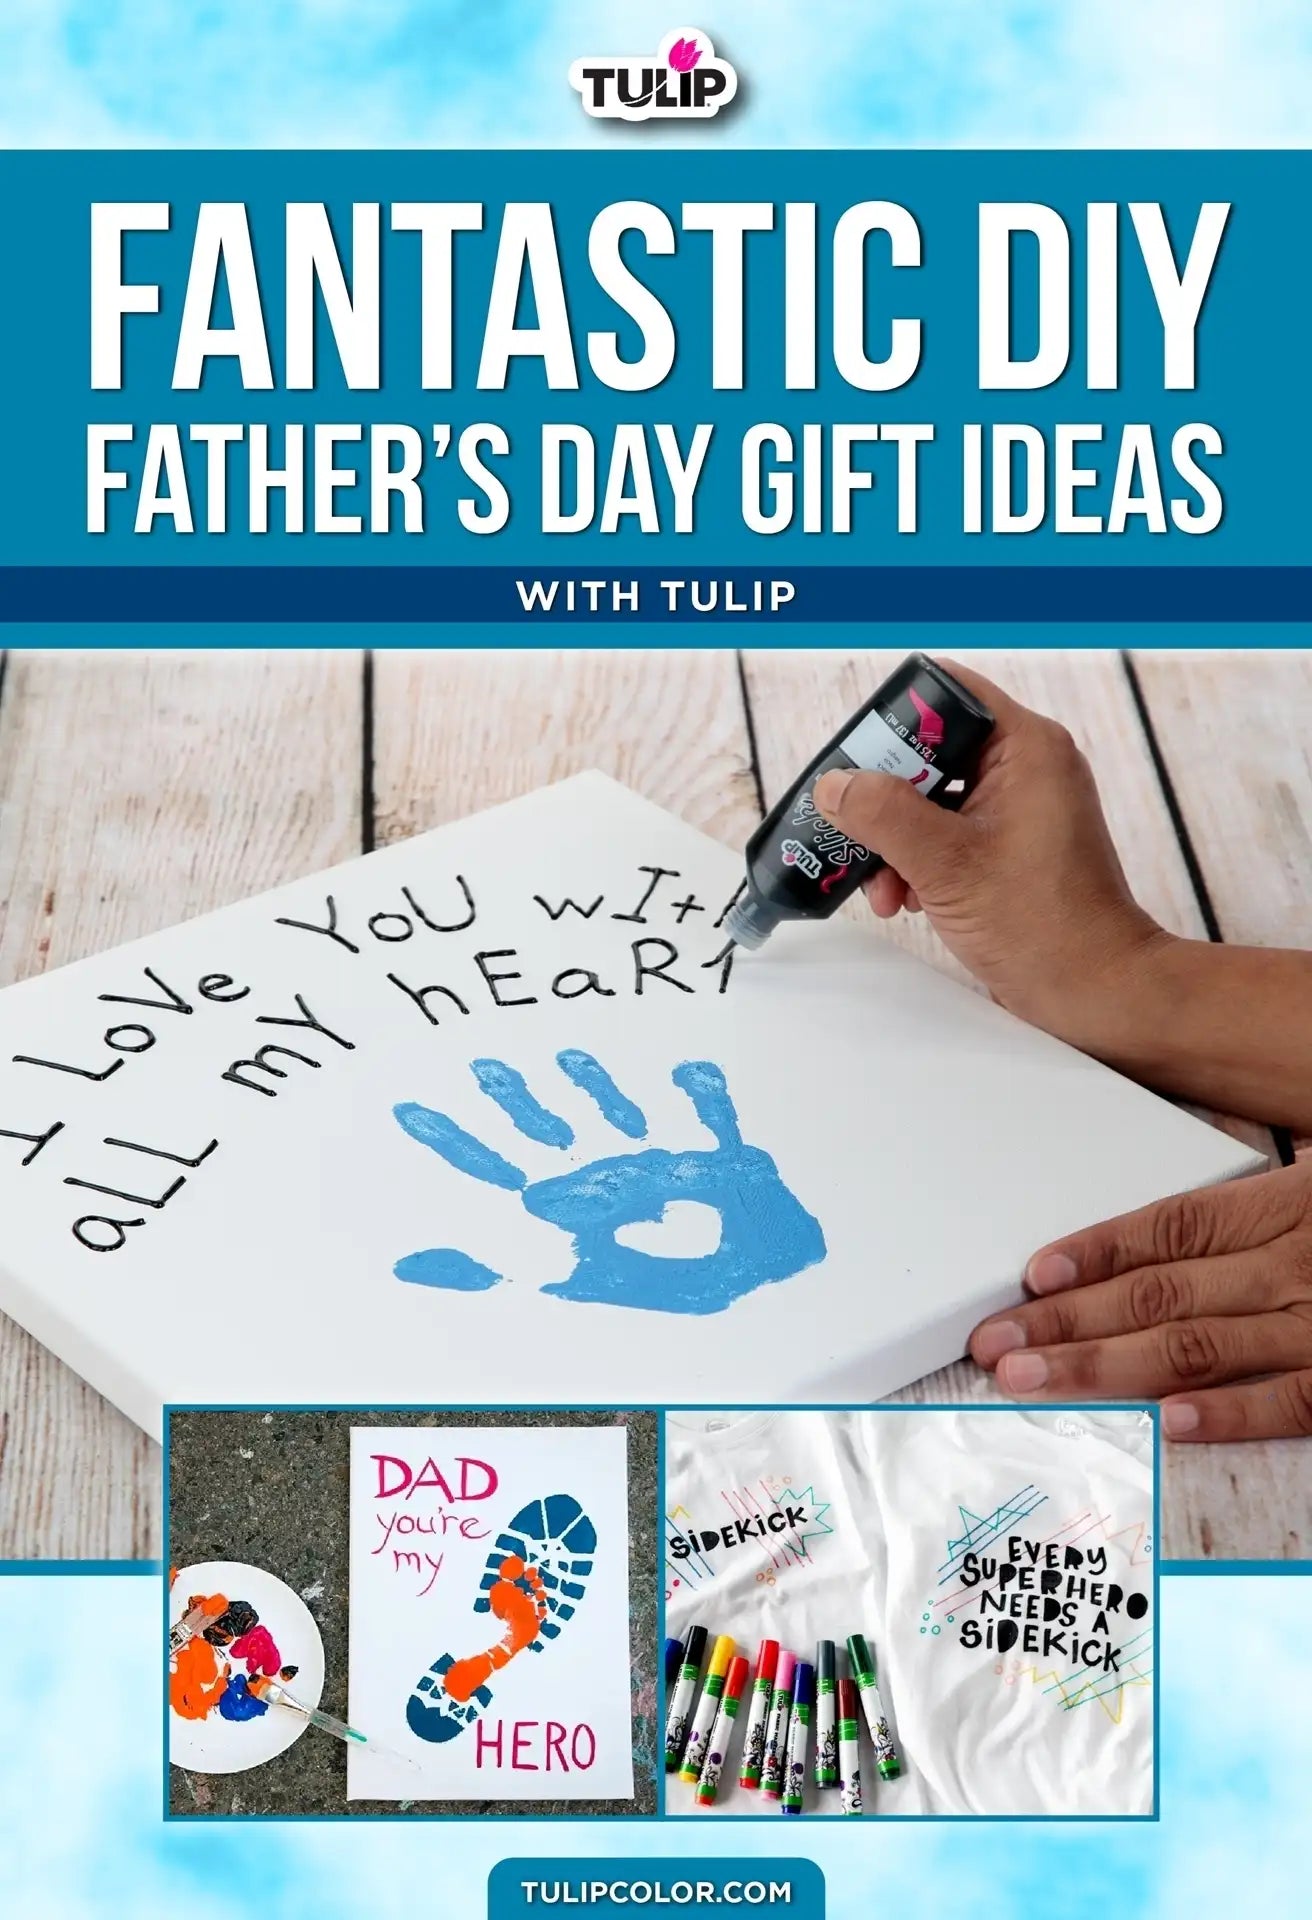 4 Fantastic DIY Father’s Day Gift Ideas with Tulip